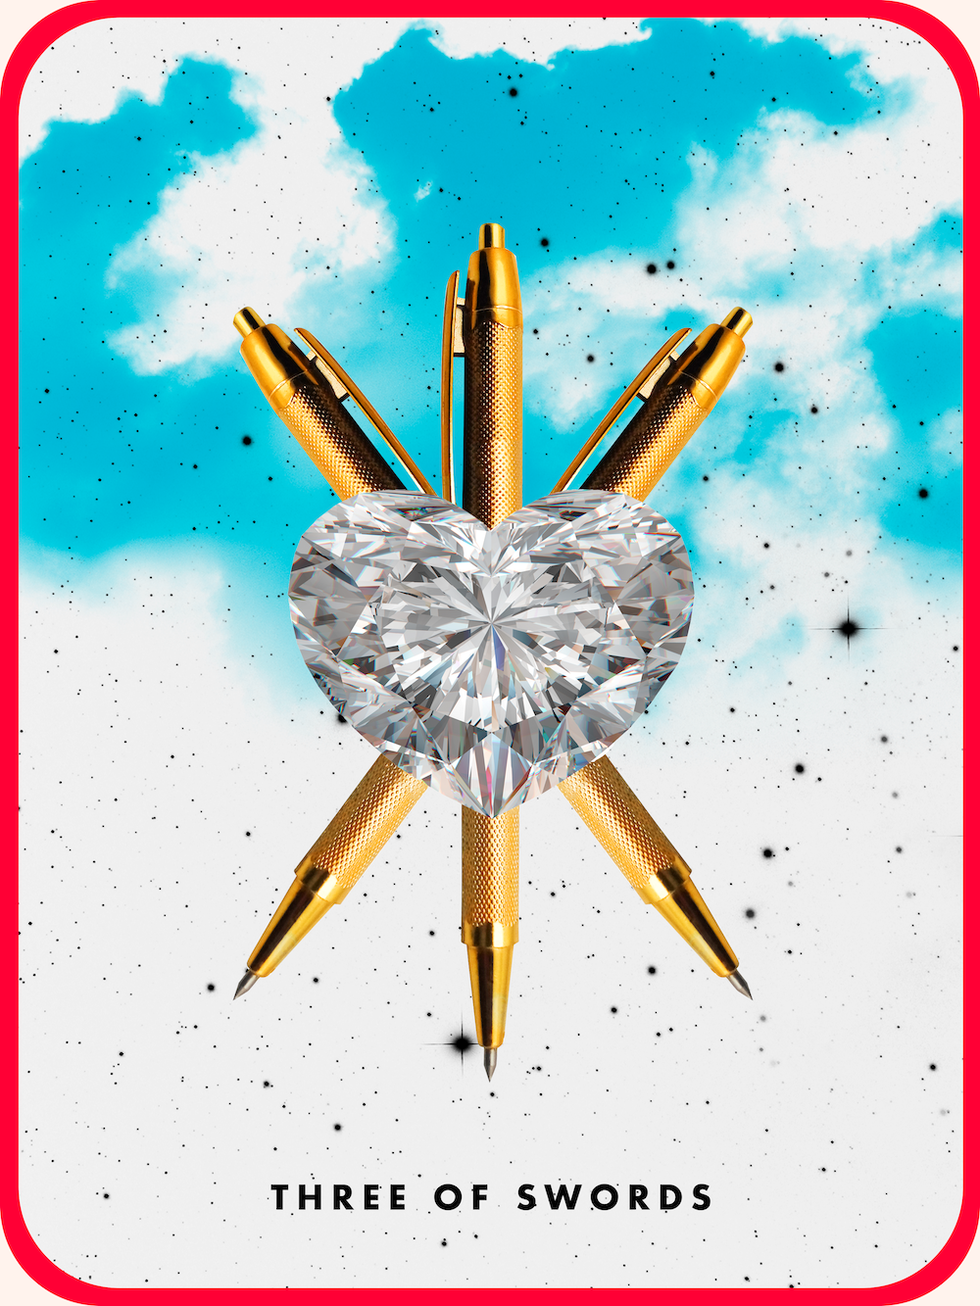 the three of swords tarot card, showing three golden pens behind a heart shaped diamond